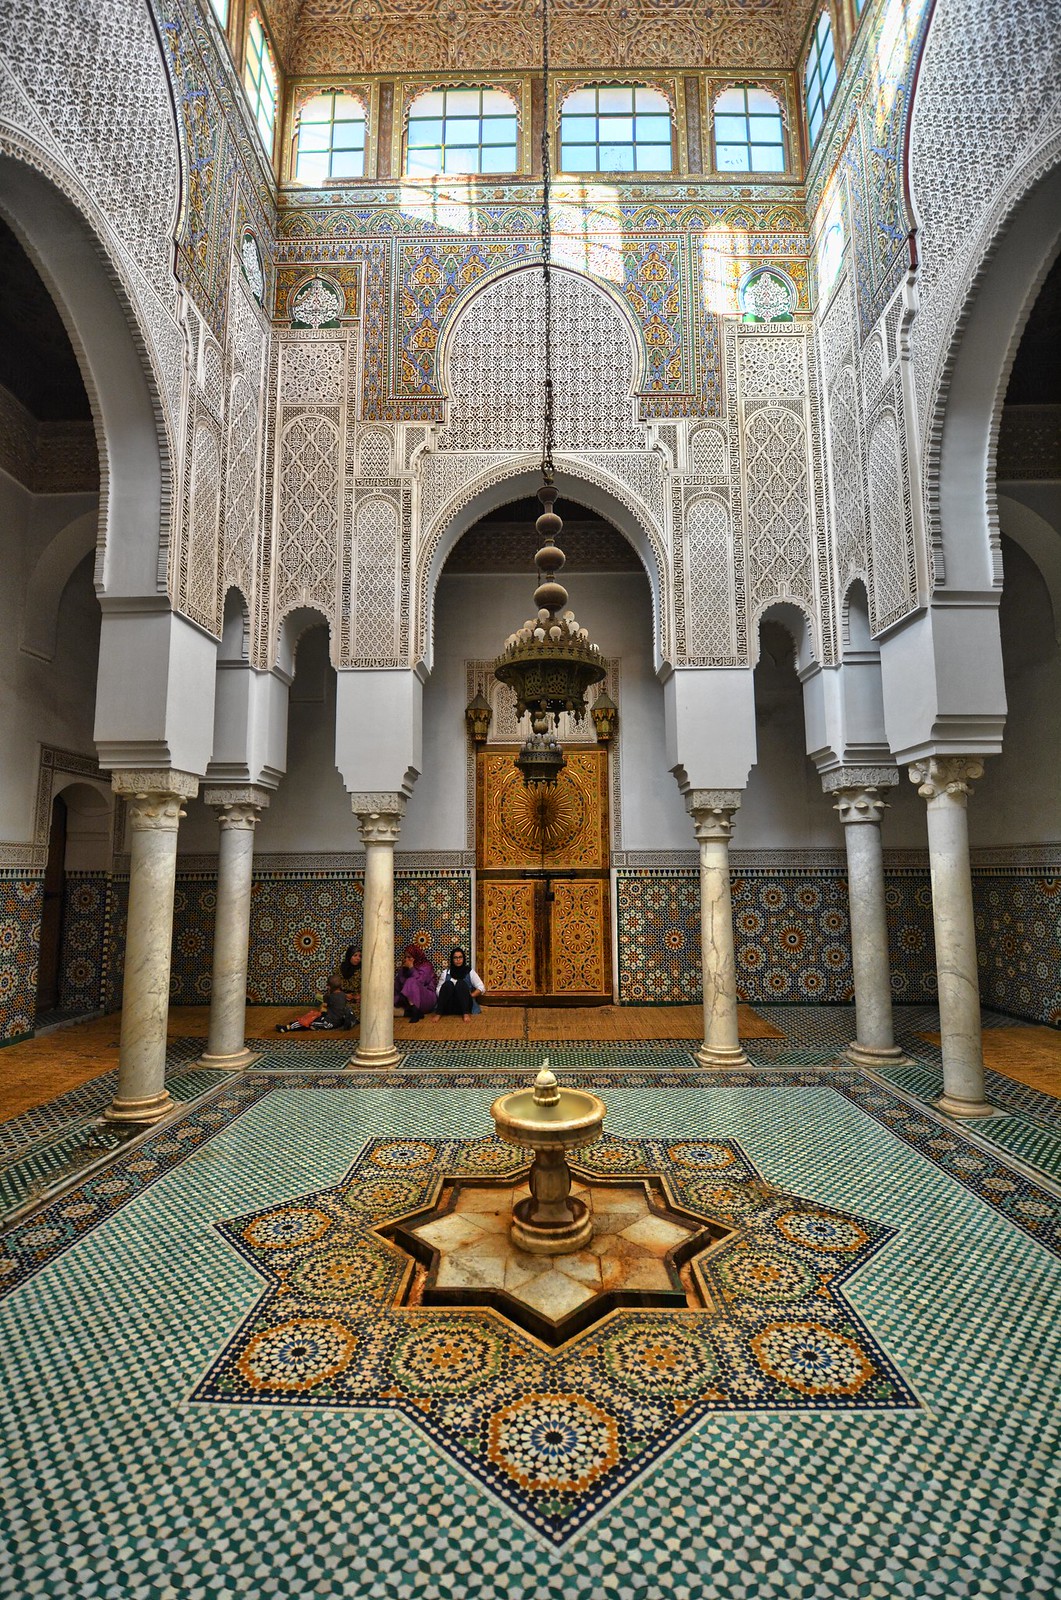 Mausoleum of Moulay Ismail,  Meknes, Morocco